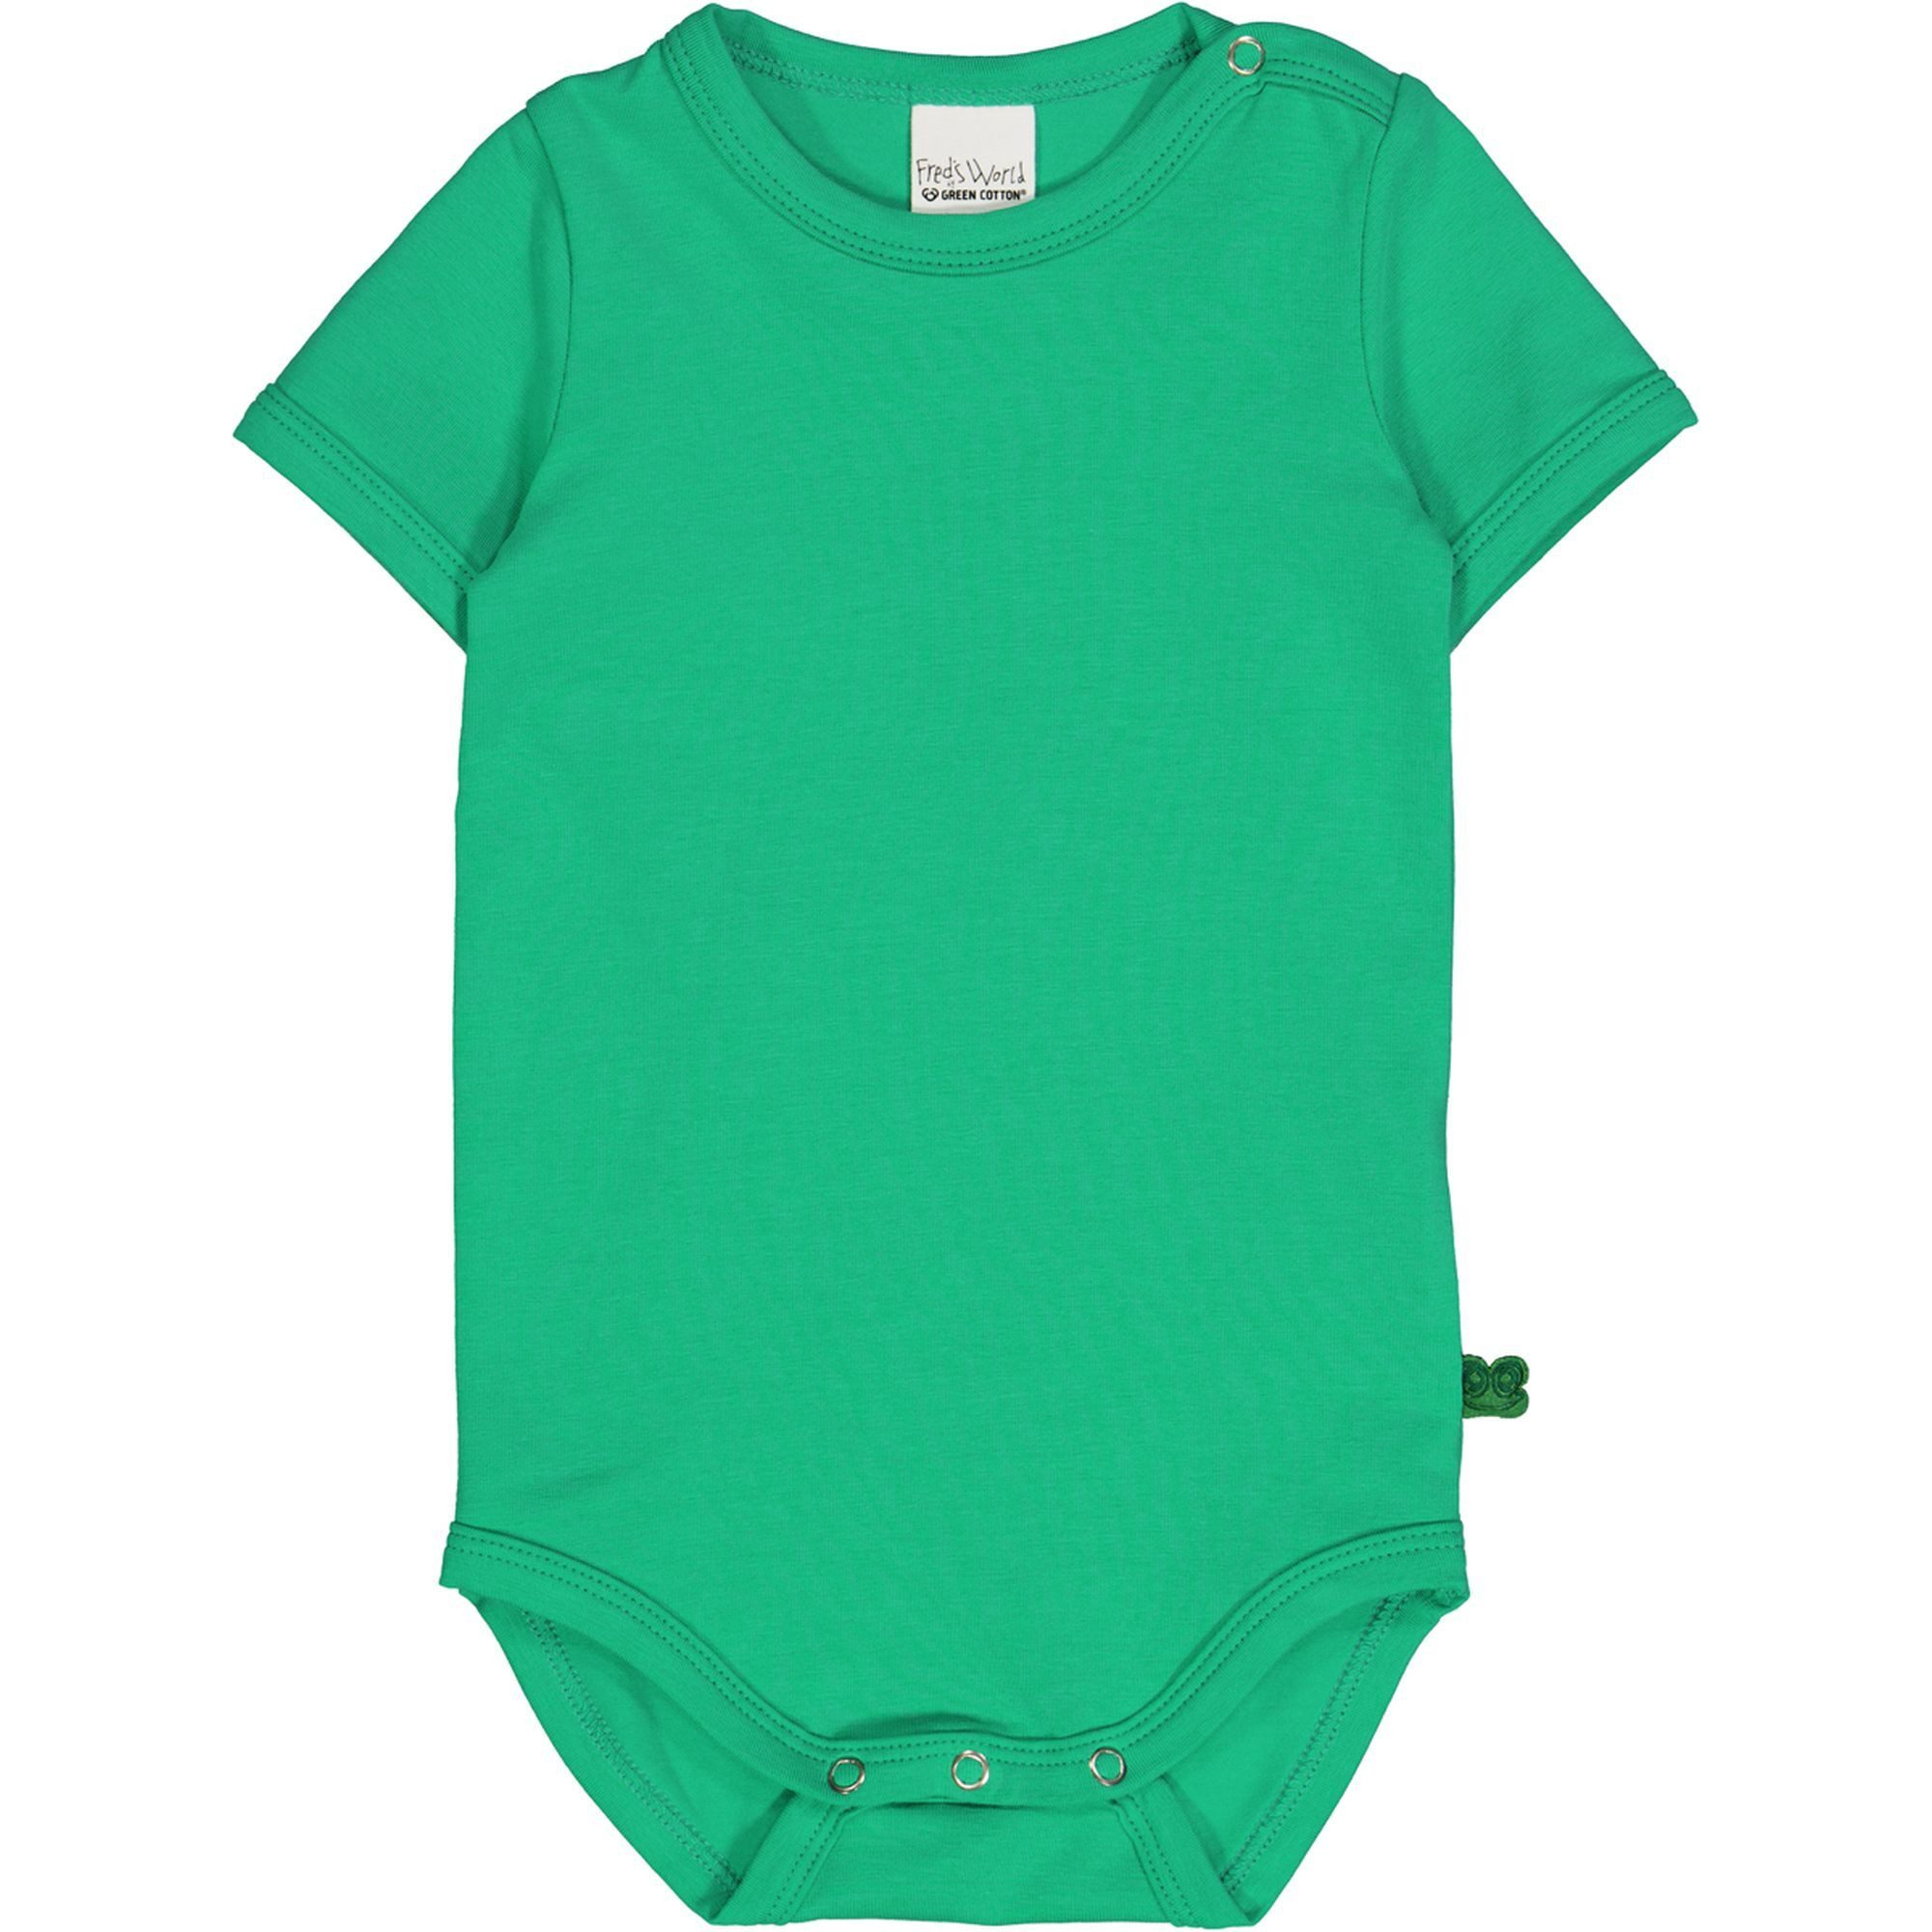 Fred's World by GREEN COTTON Shirtbody